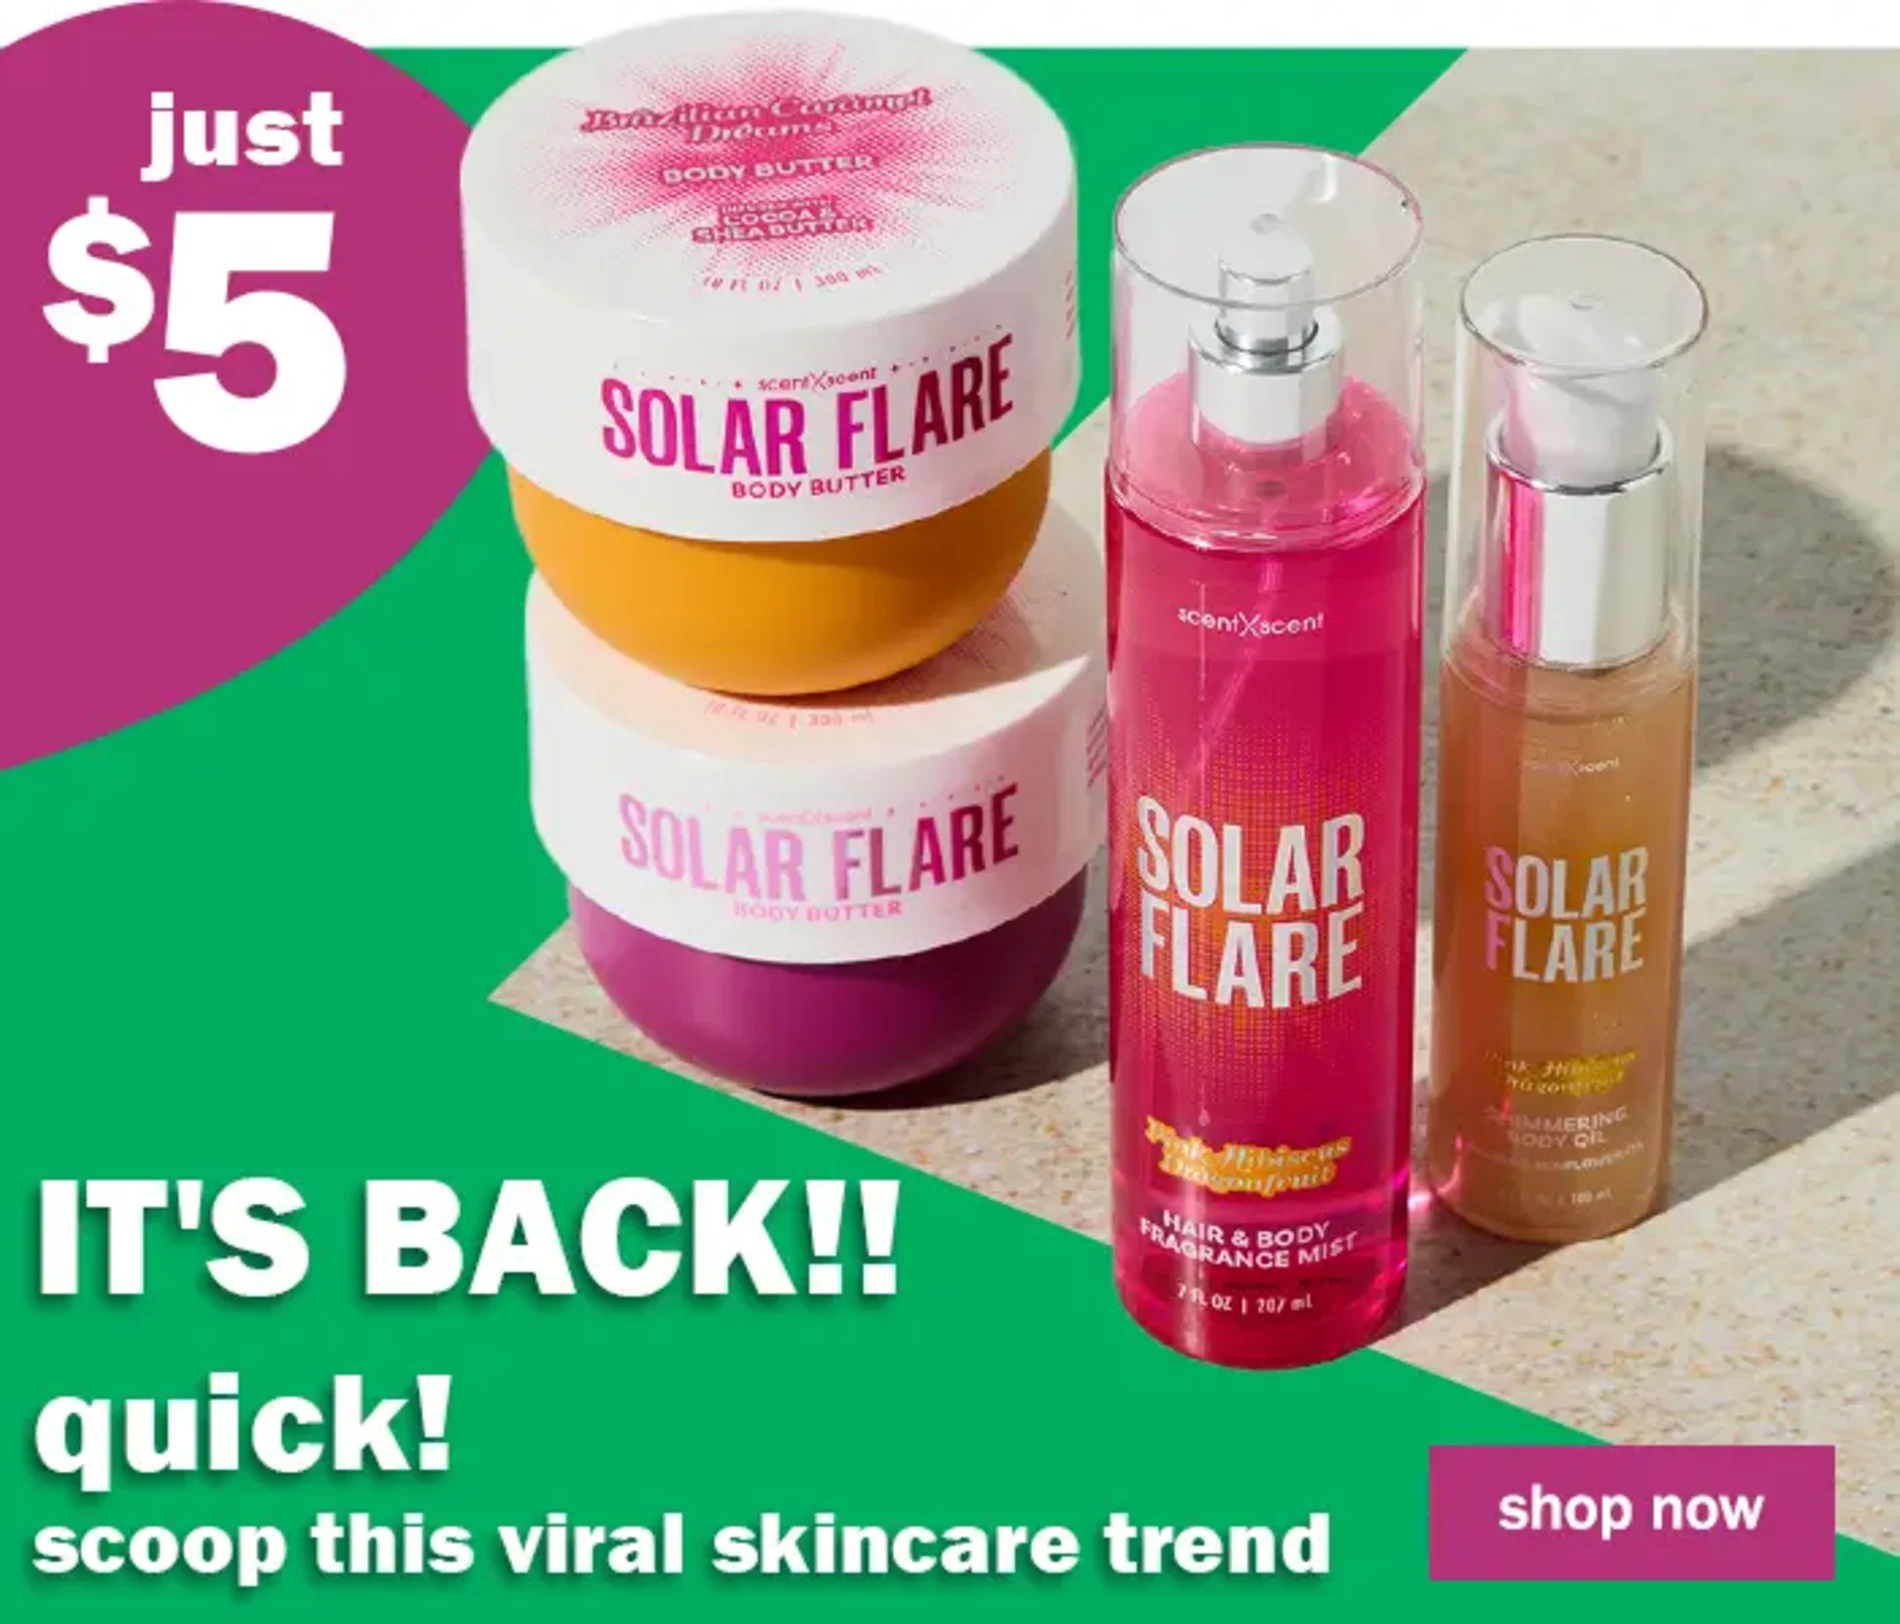 Just $5. It's Back!! Quick! Scoop this viral skincare trend. Shop Now.